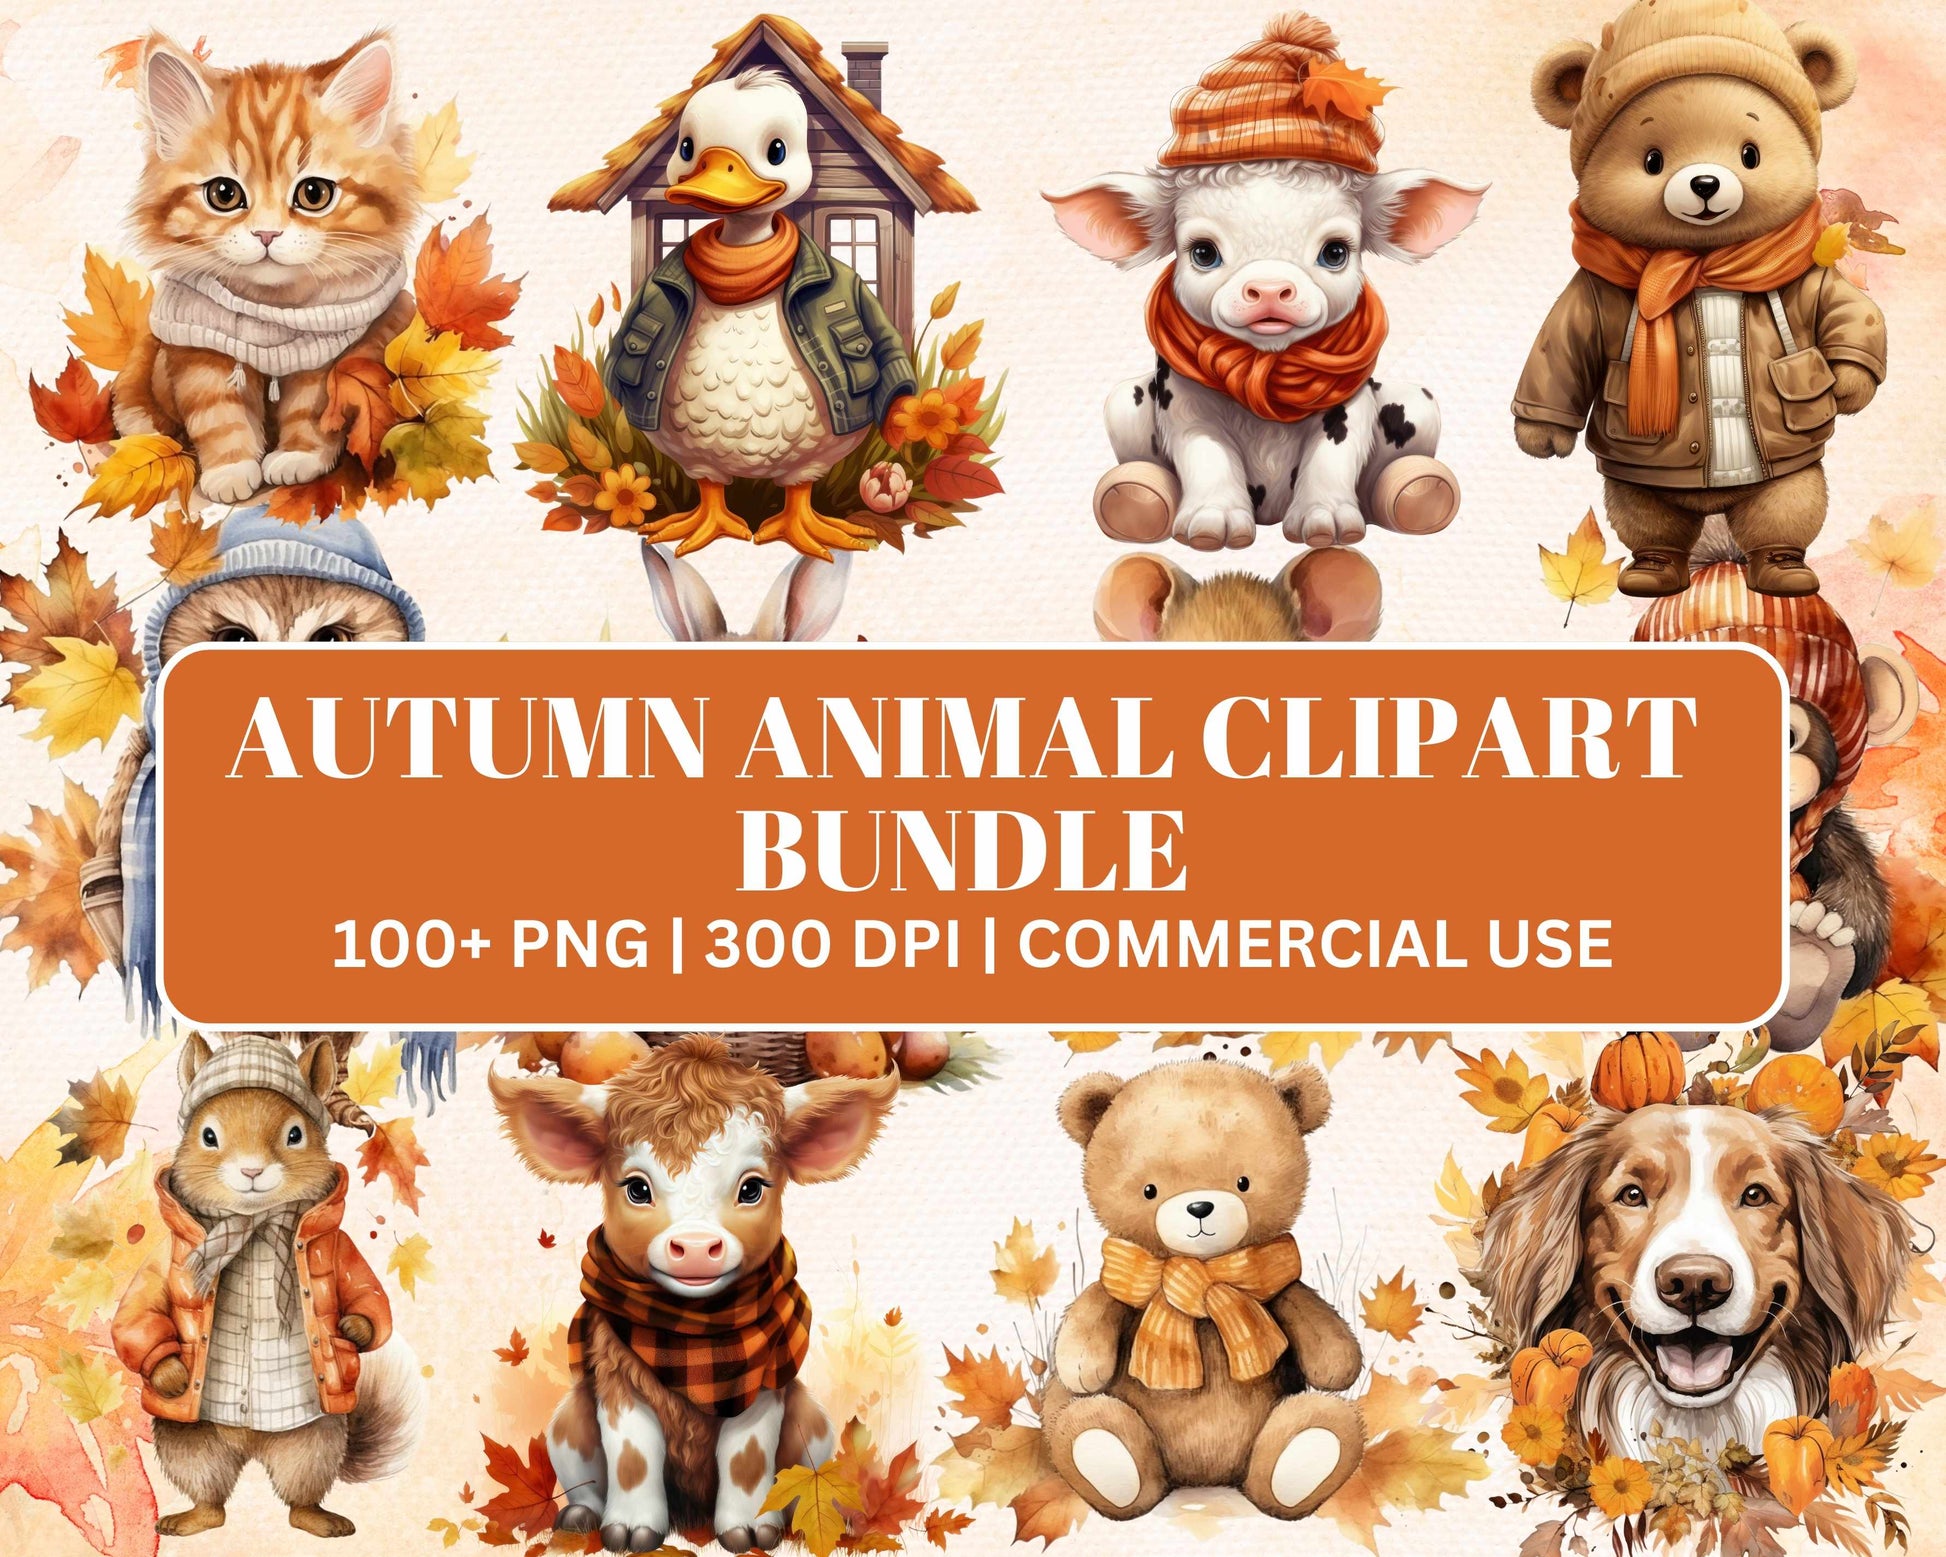 Watercolor Fall Leaves and Animals Clipart, Cute Autumn Woodland Creatures Graphics, Seasonal DIY Design Elements, High-Quality Hand-Painted Clipart, Fall Decor Illustrations Bundle